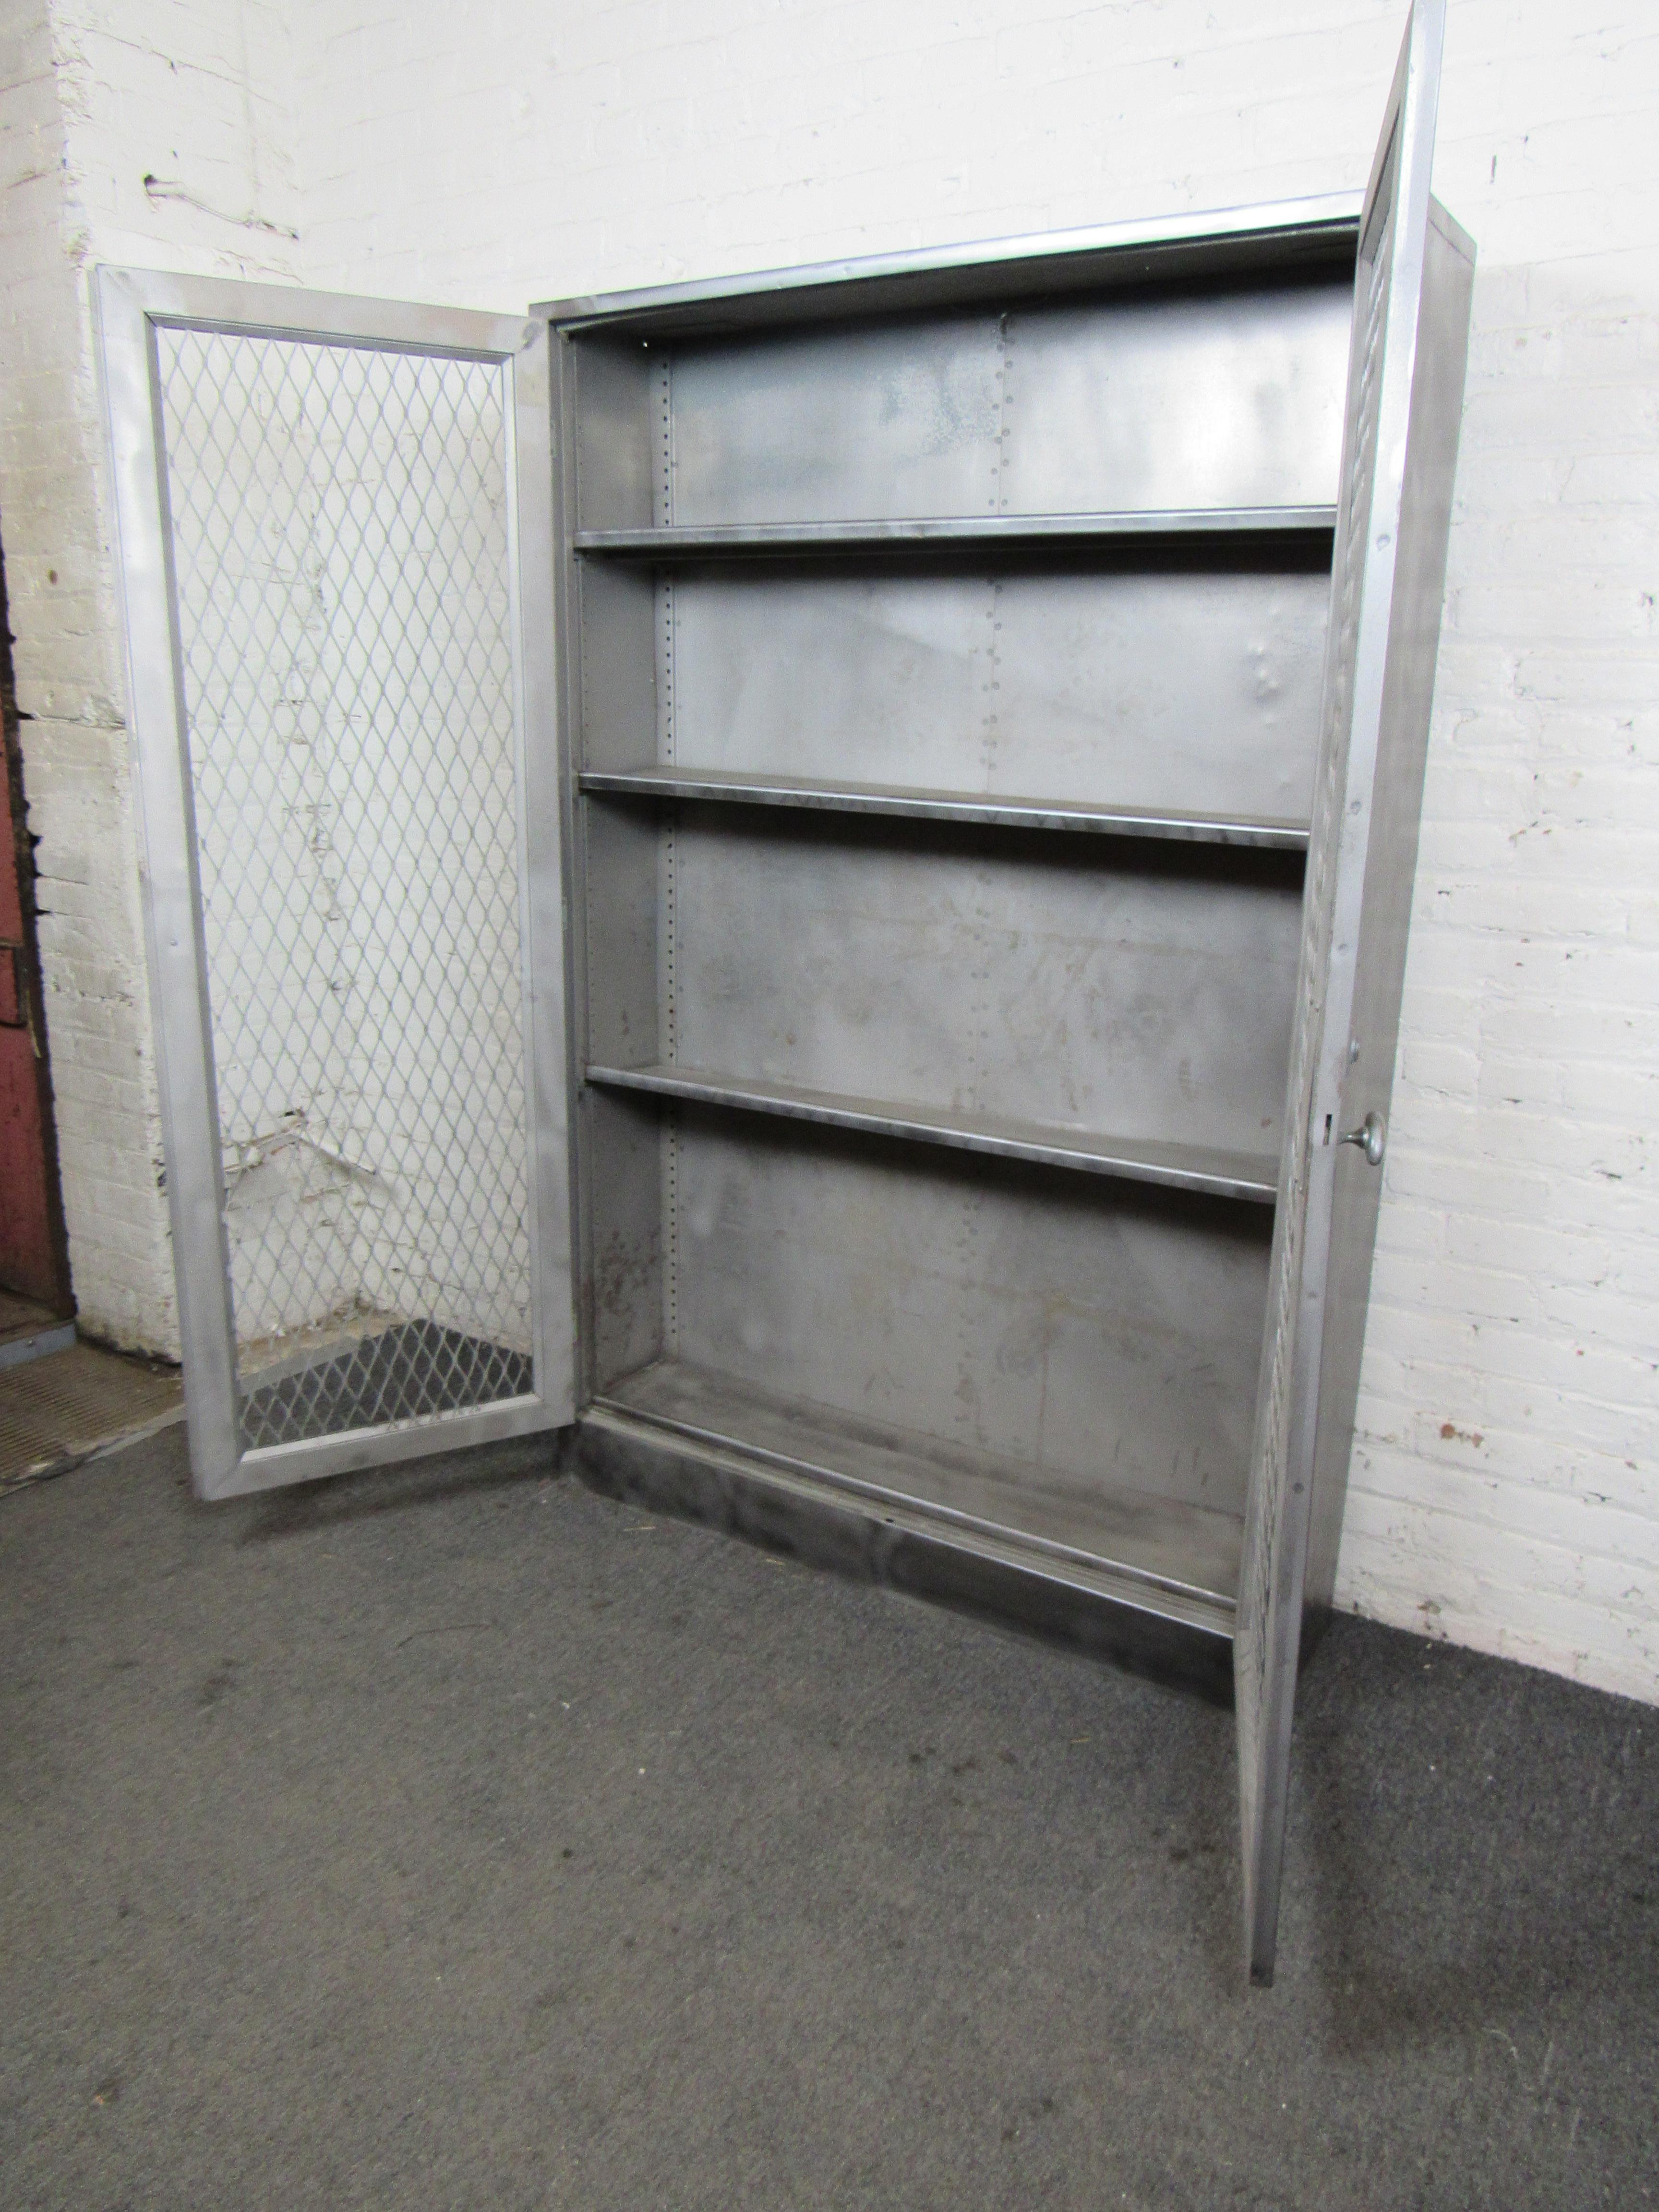 Large factory cabinet restored in a bare metal style finish. Unique mesh front doors and adjustable shelves. Repurposed locker great for home or office use.
Please confirm location NY or NJ.